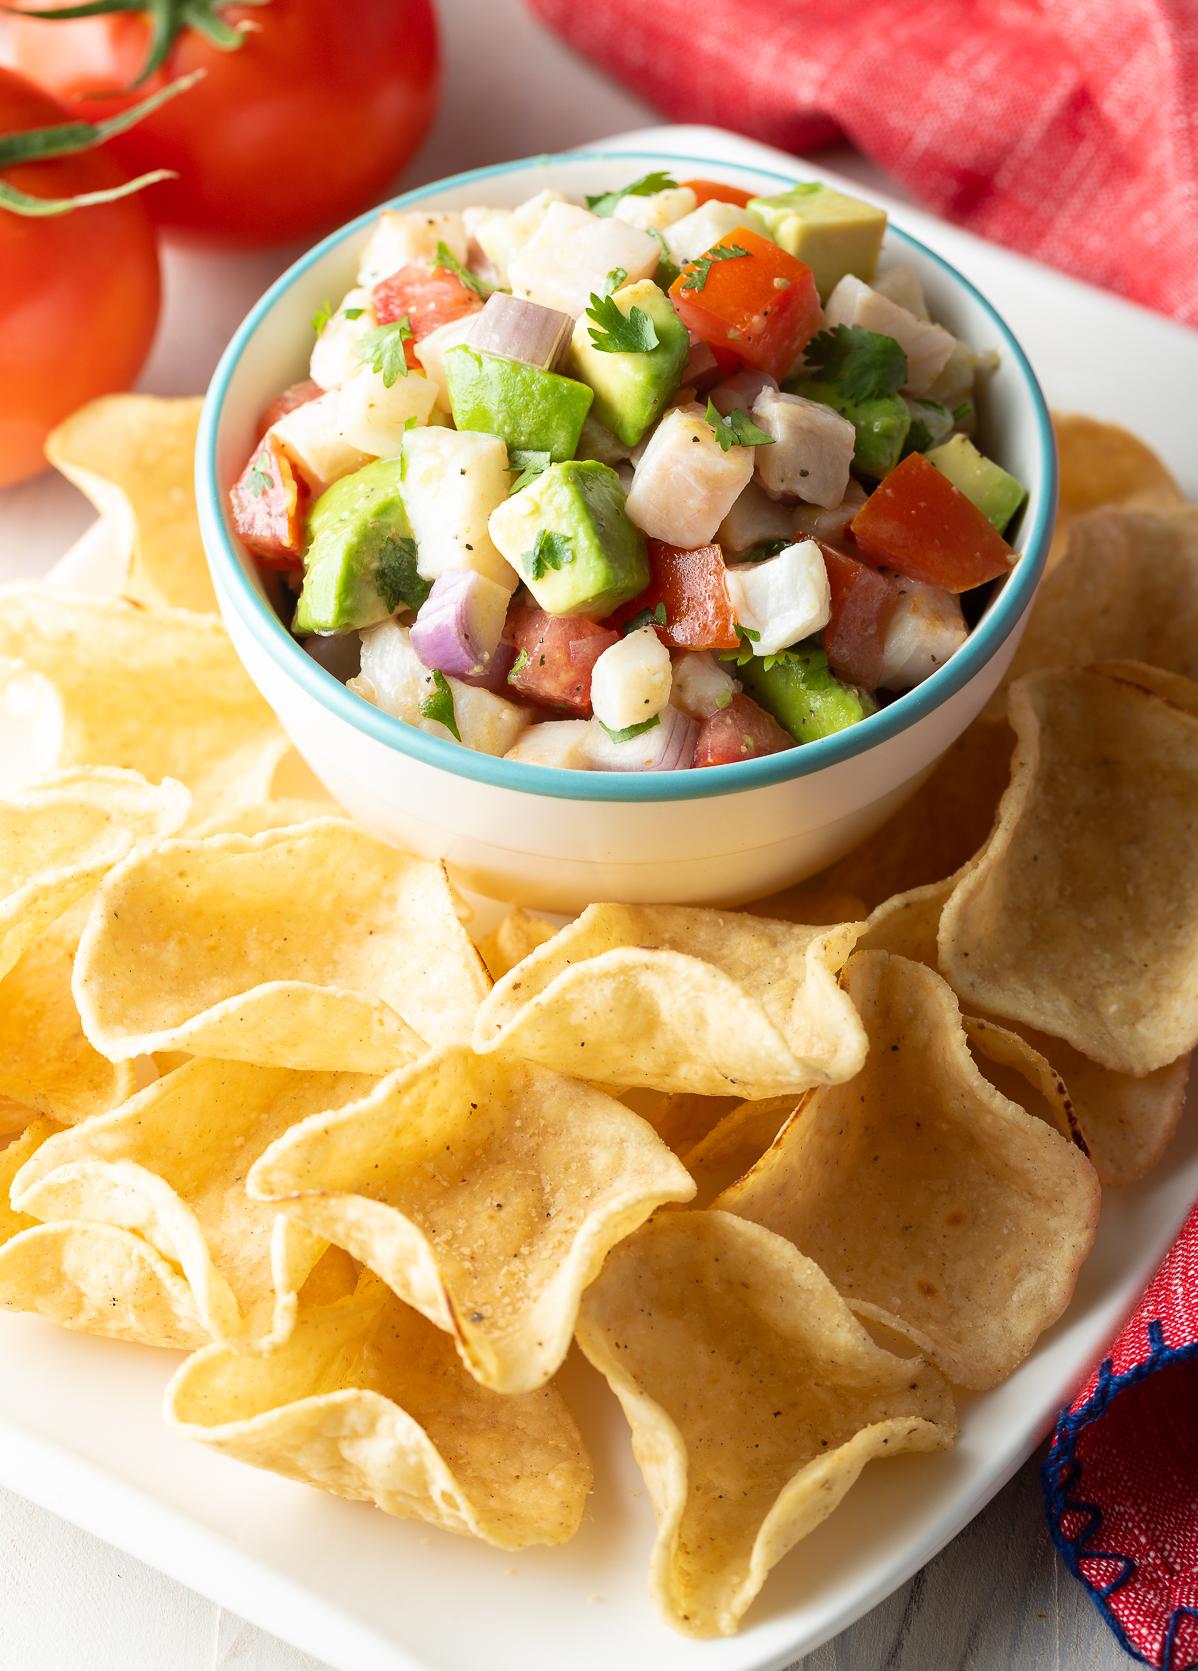  Taco Tuesdays just got even better with this delightful ceviche!